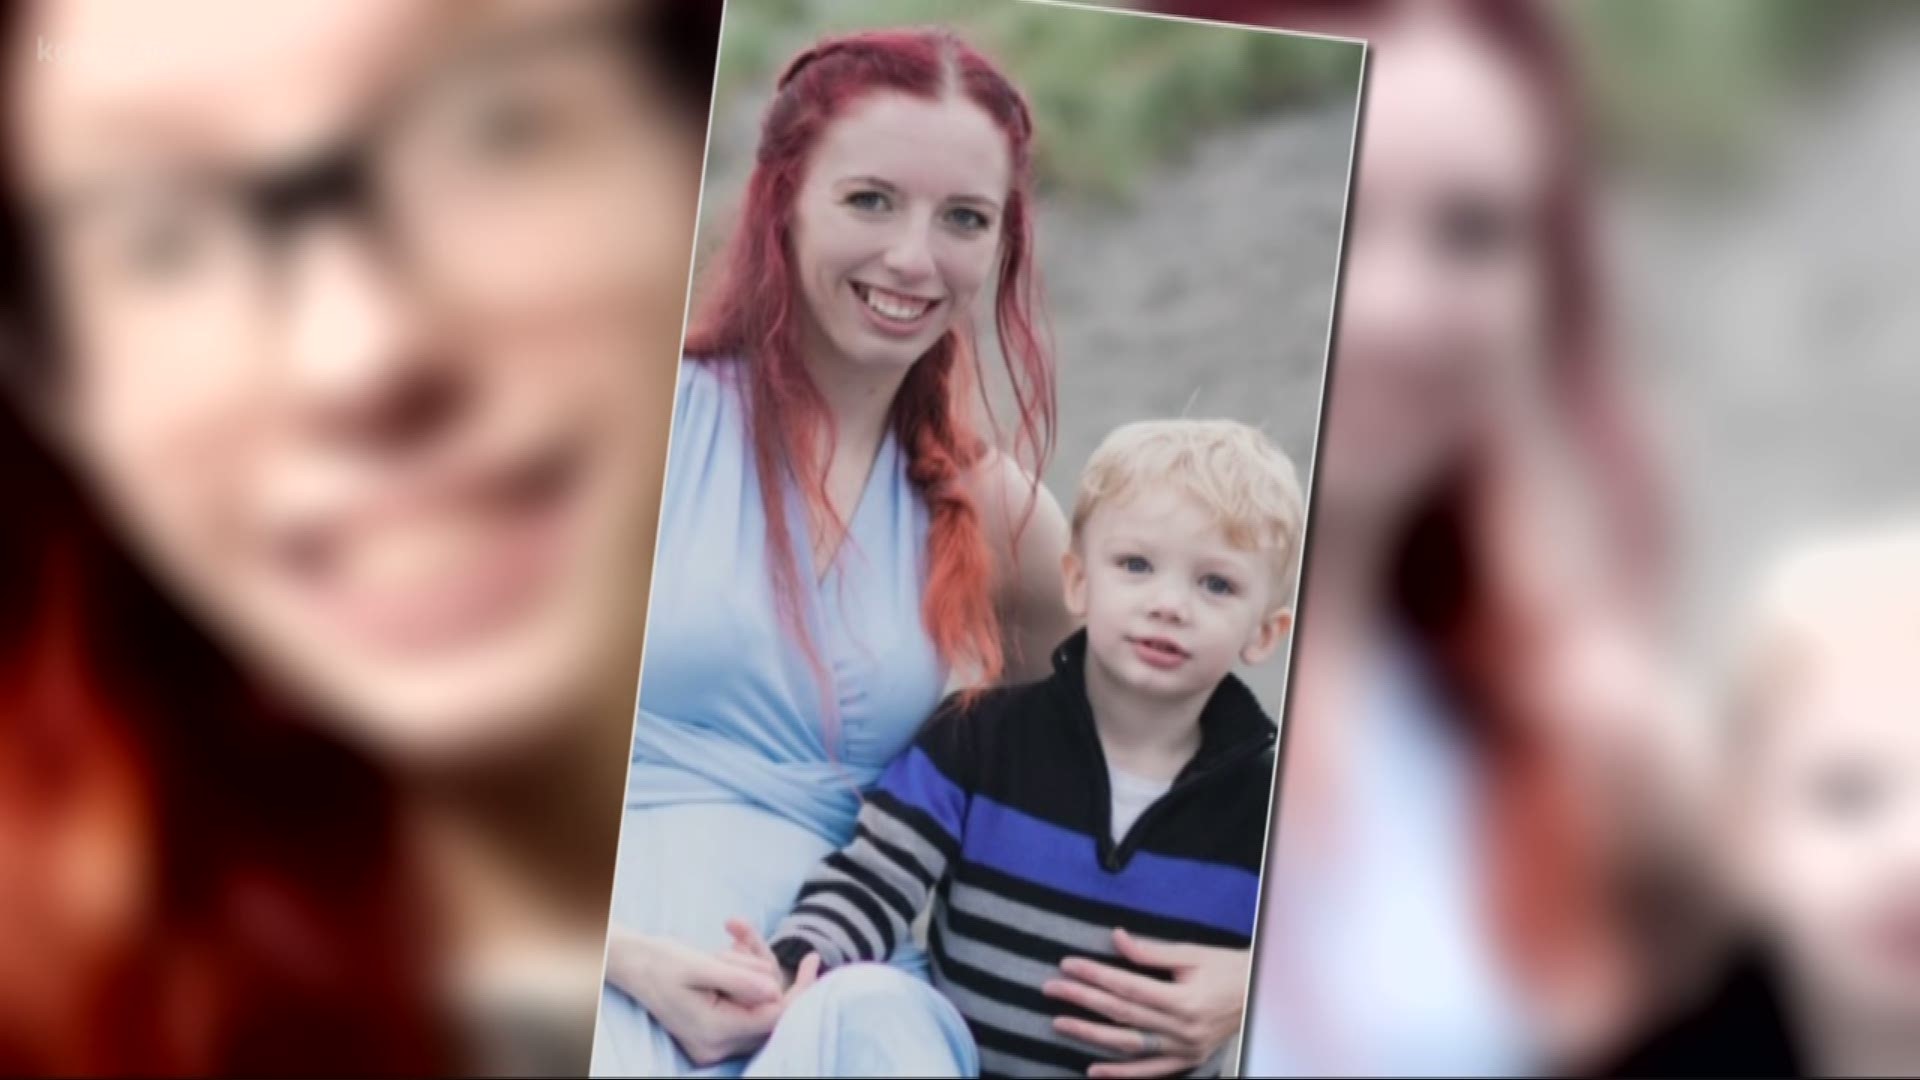 A new and sad development as the bodies of 25-year-old Karissa Fretwell and her 3-year-old son, Billy, were found in a heavily wooded, remote area of Yamhill County.